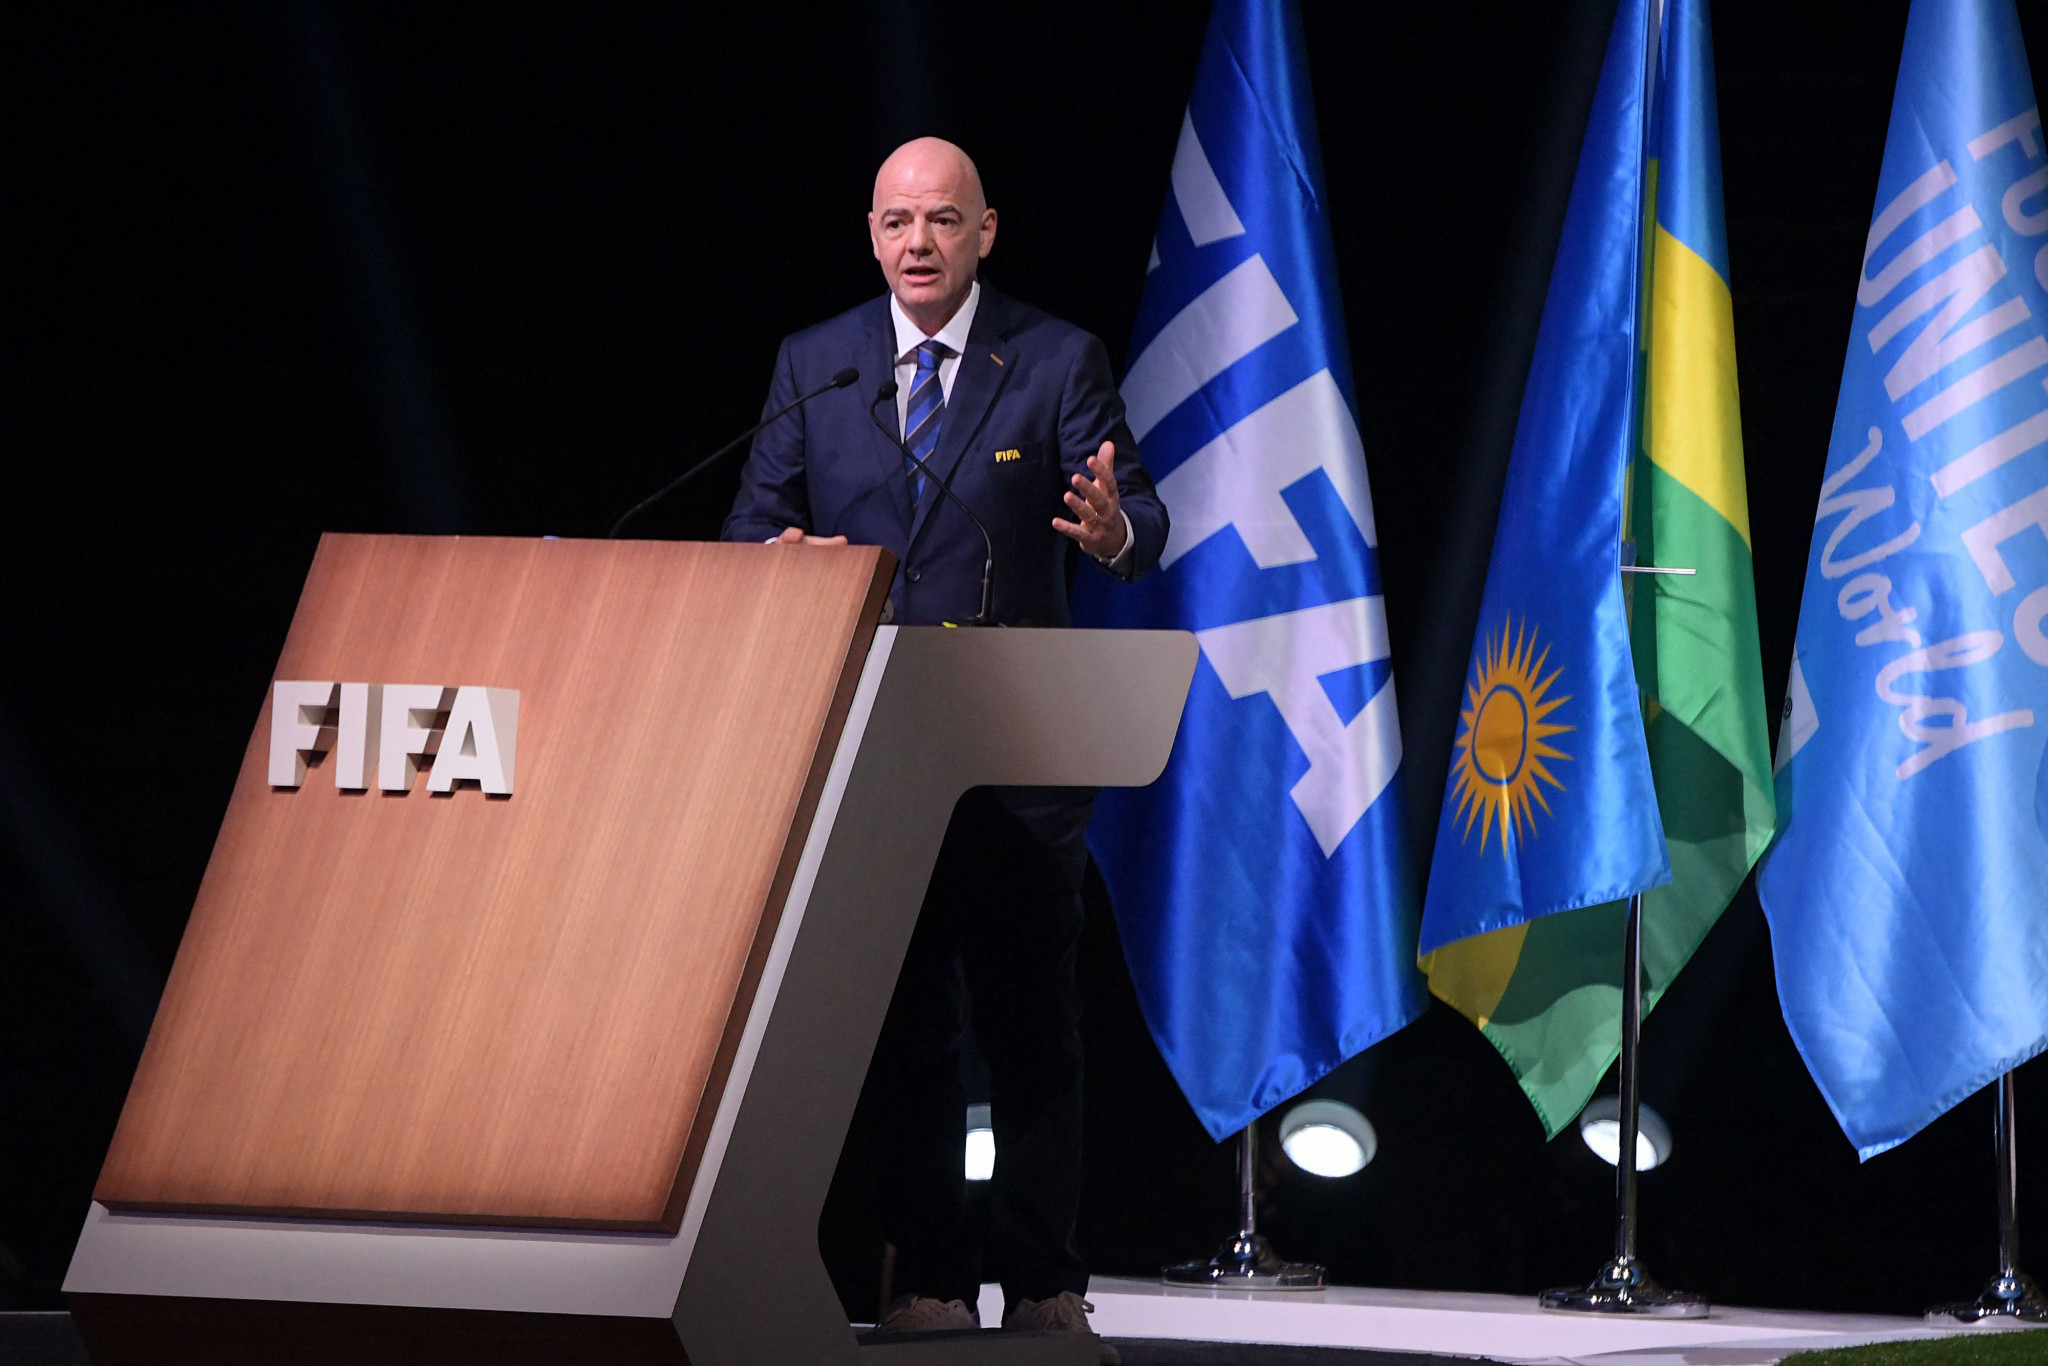 Gianni Infantino was re-elected by acclamation for a new term ending in 2027 ©Getty Images